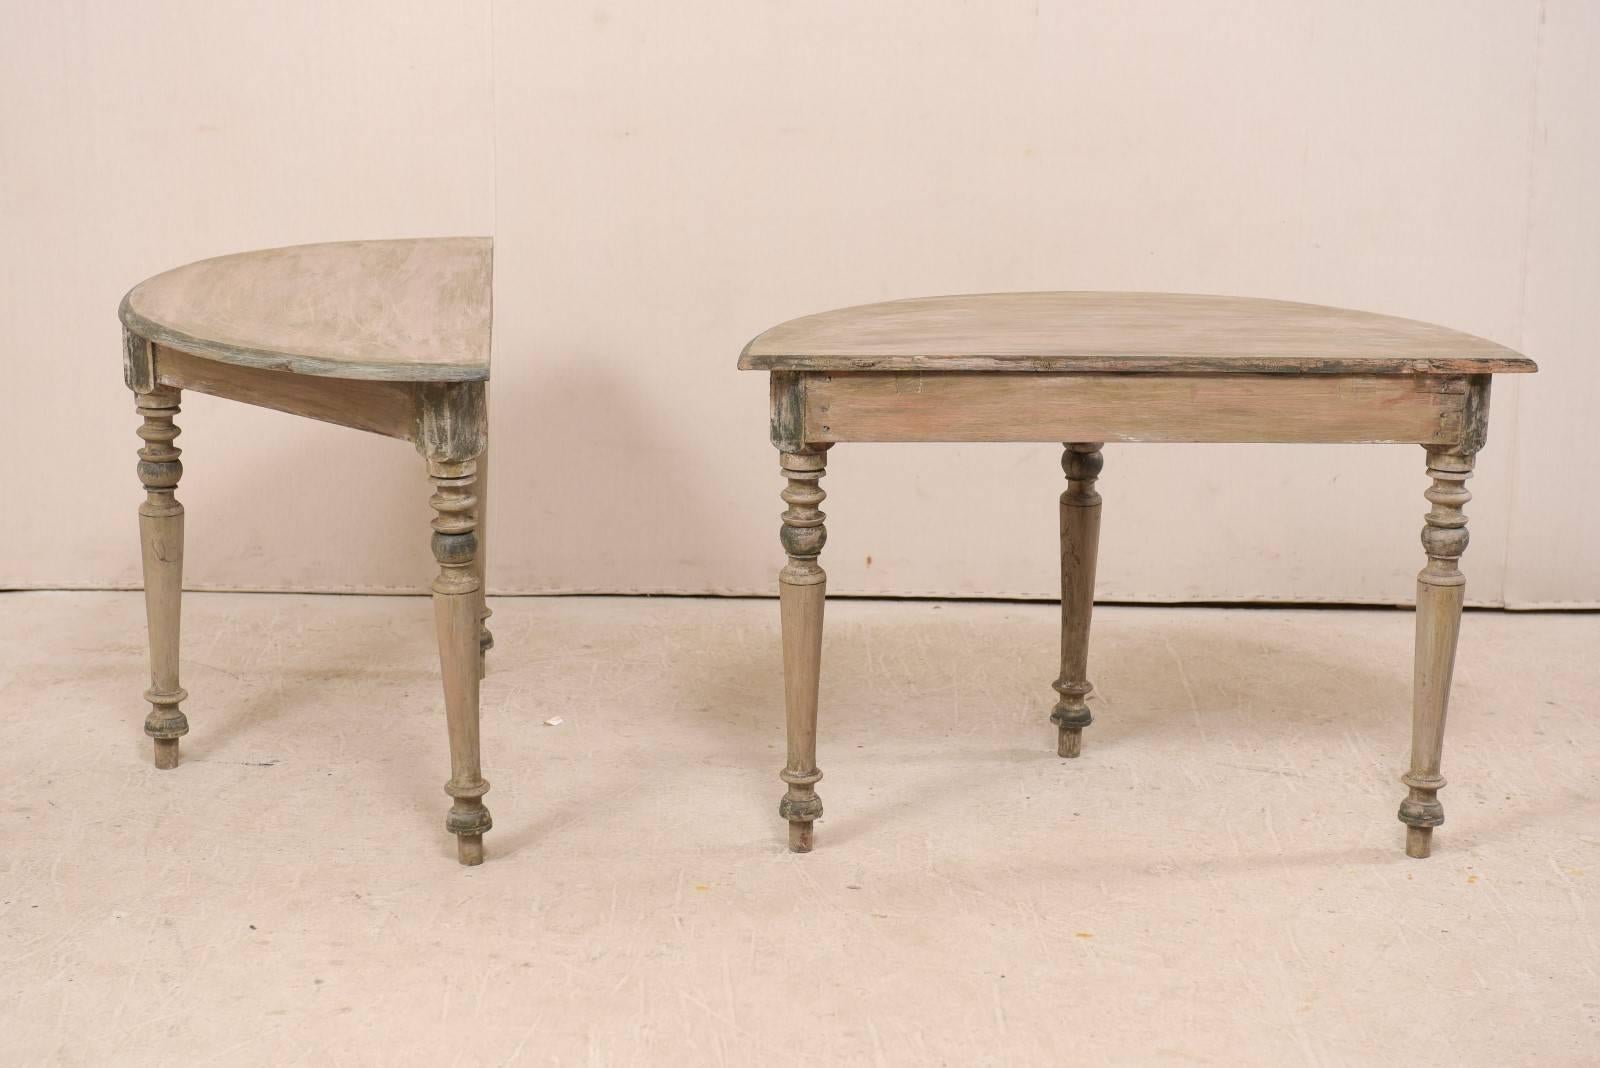 Pair of 19th Century Swedish Painted Wood Demi-lune Tables on Nicely Turned Legs 2